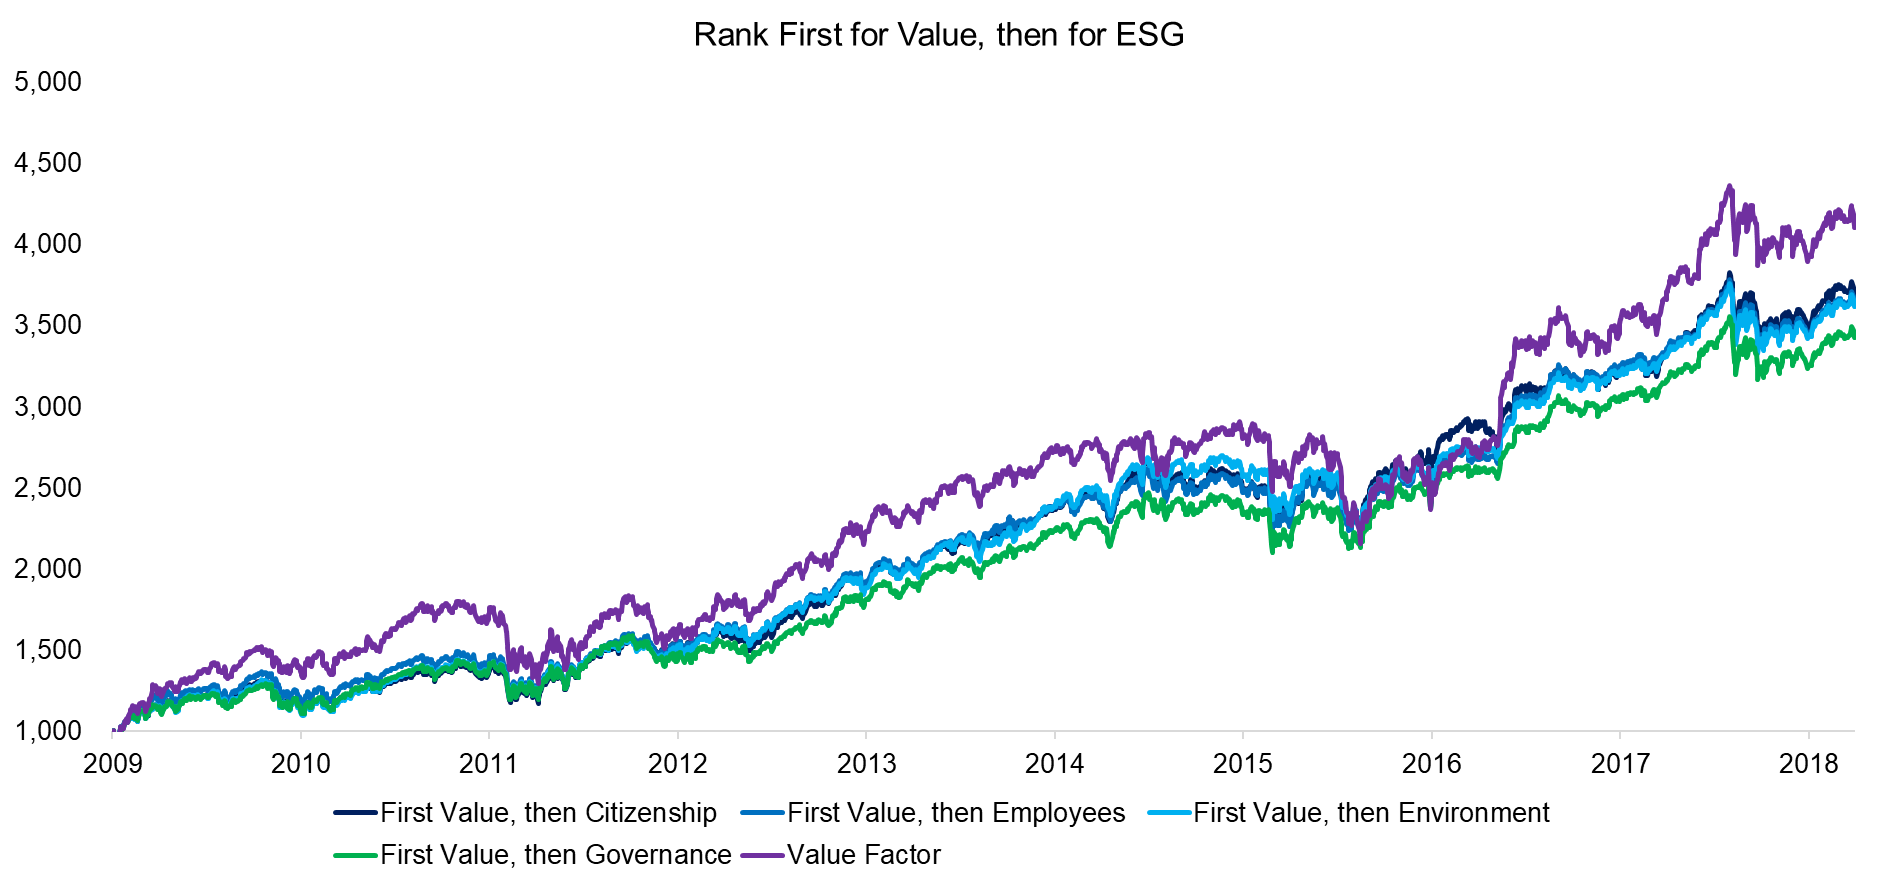 Rank First for Value, then for ESG